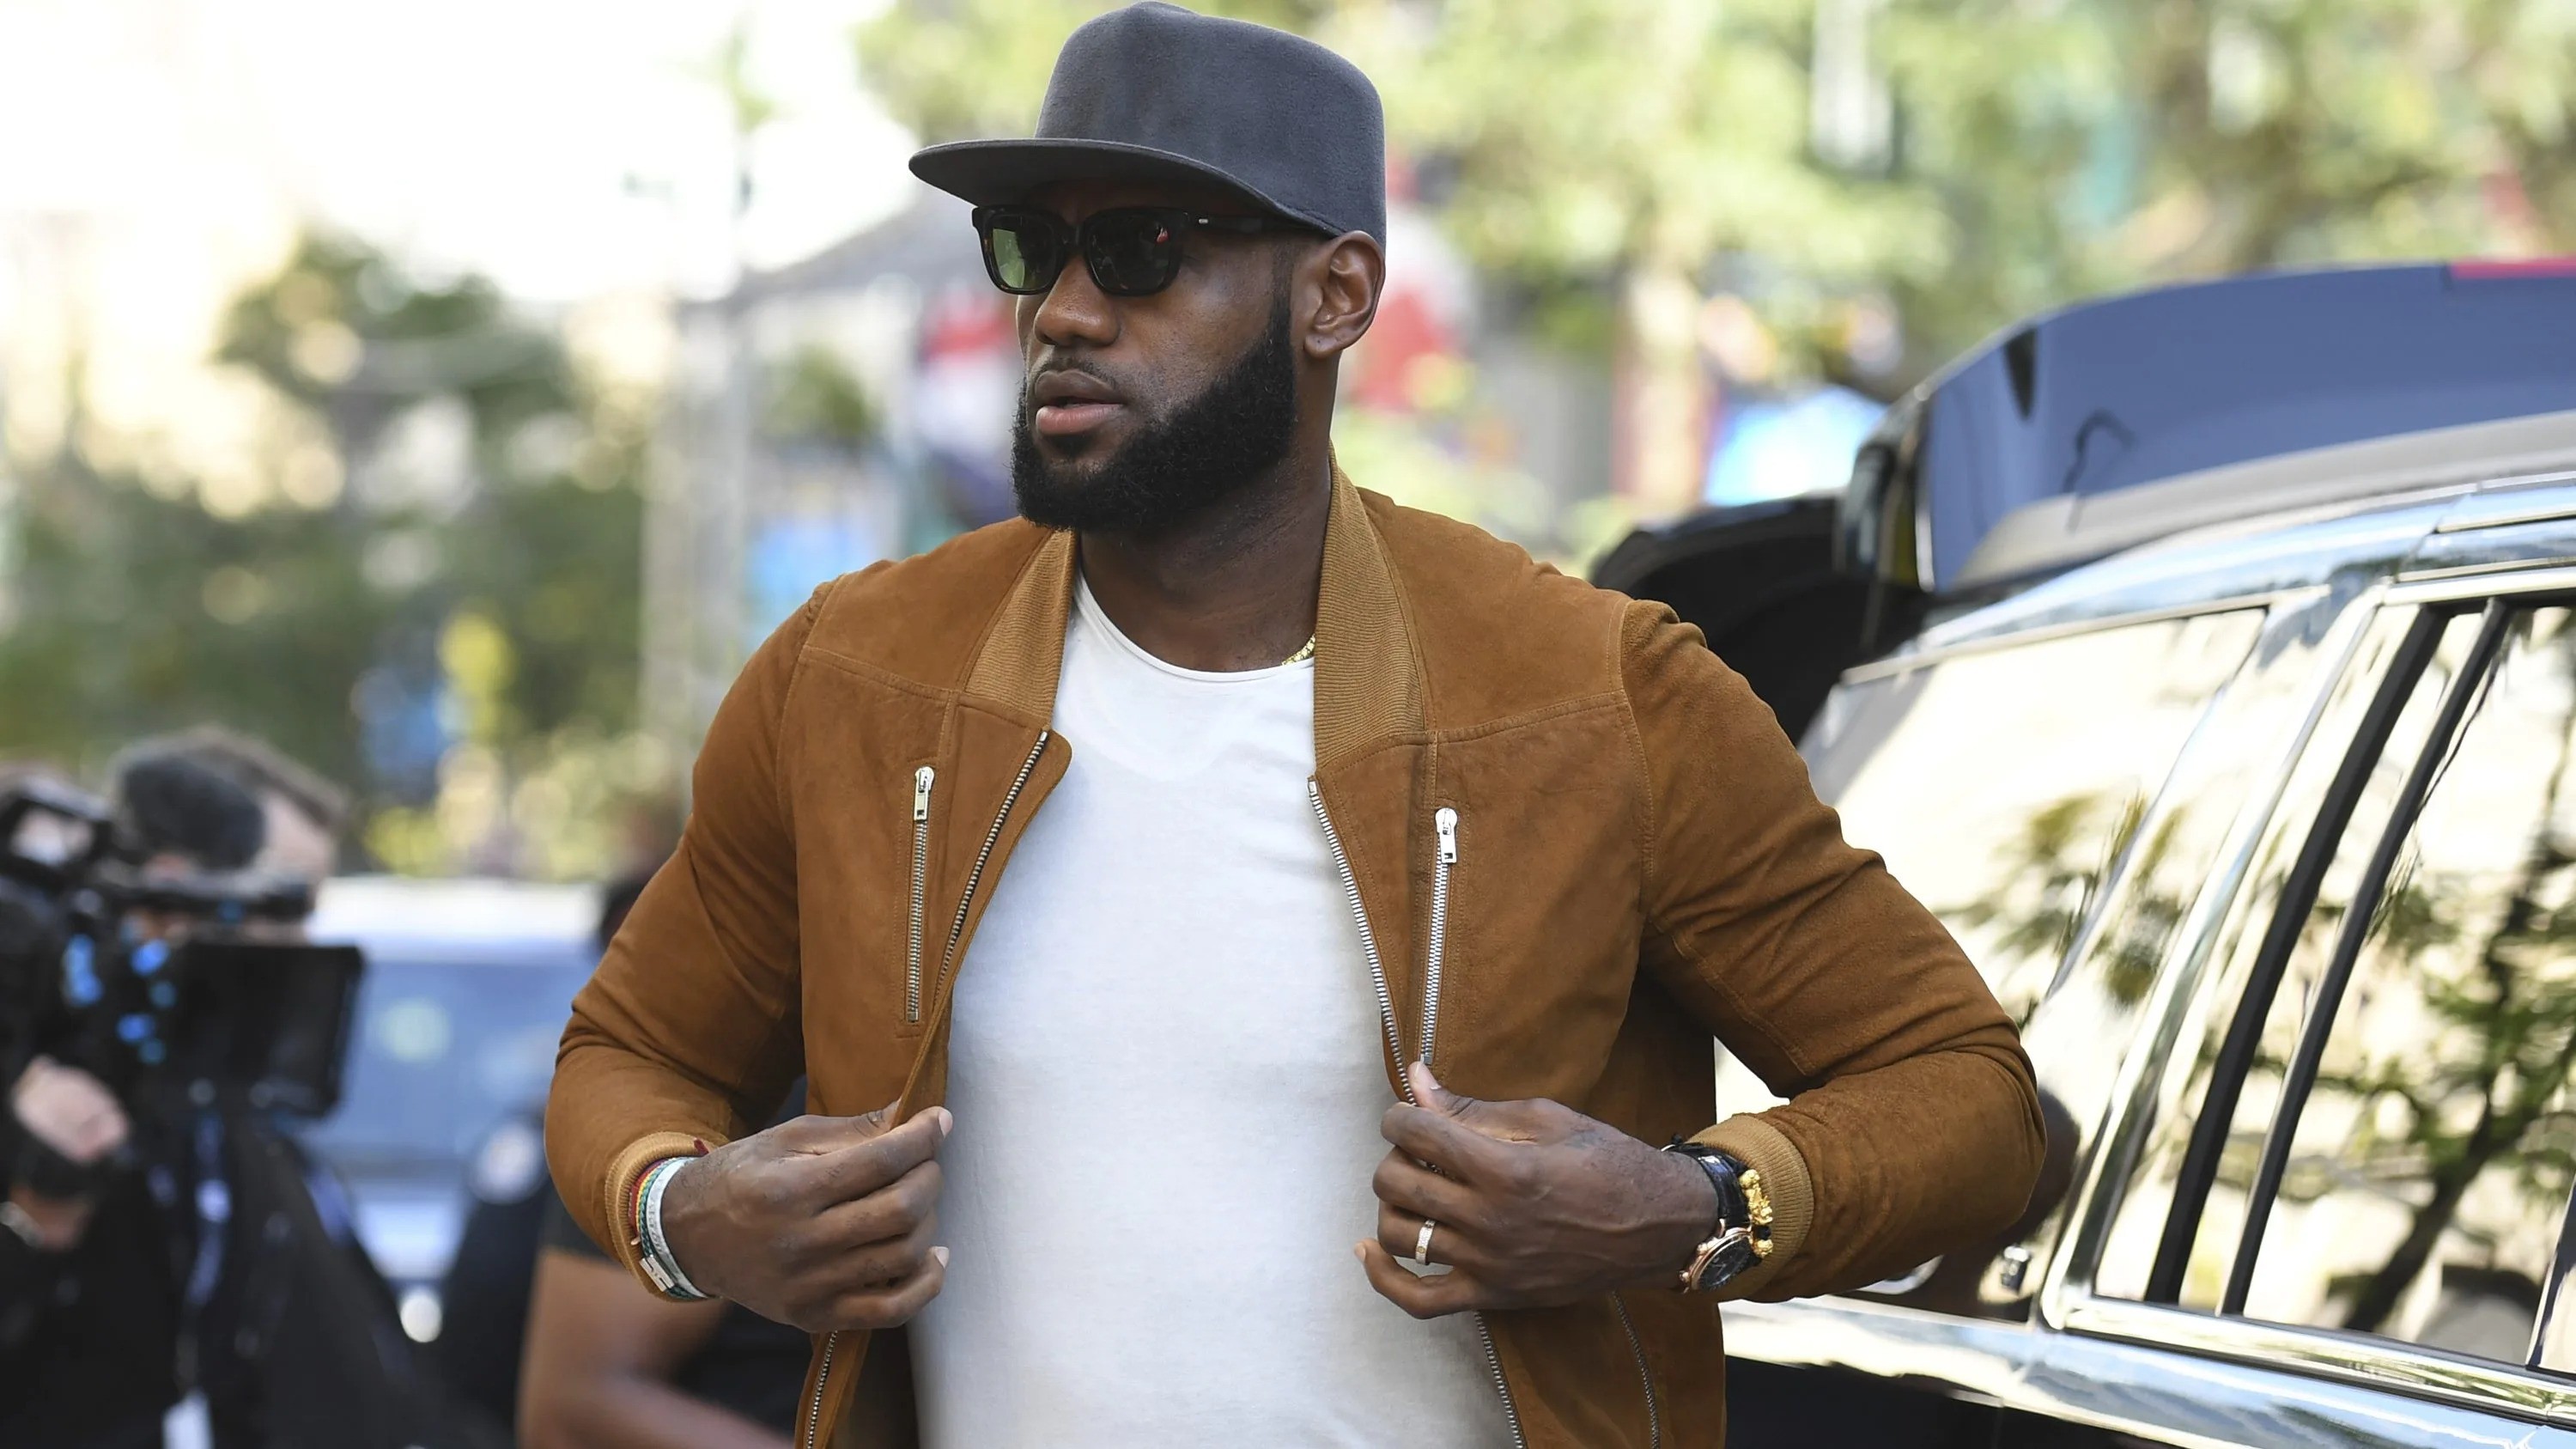 NBA legend LeBron James and his life from poverty and violence from one shabby apartment to another in Akron to lavish mansions and dropping out of school to pursue his passion